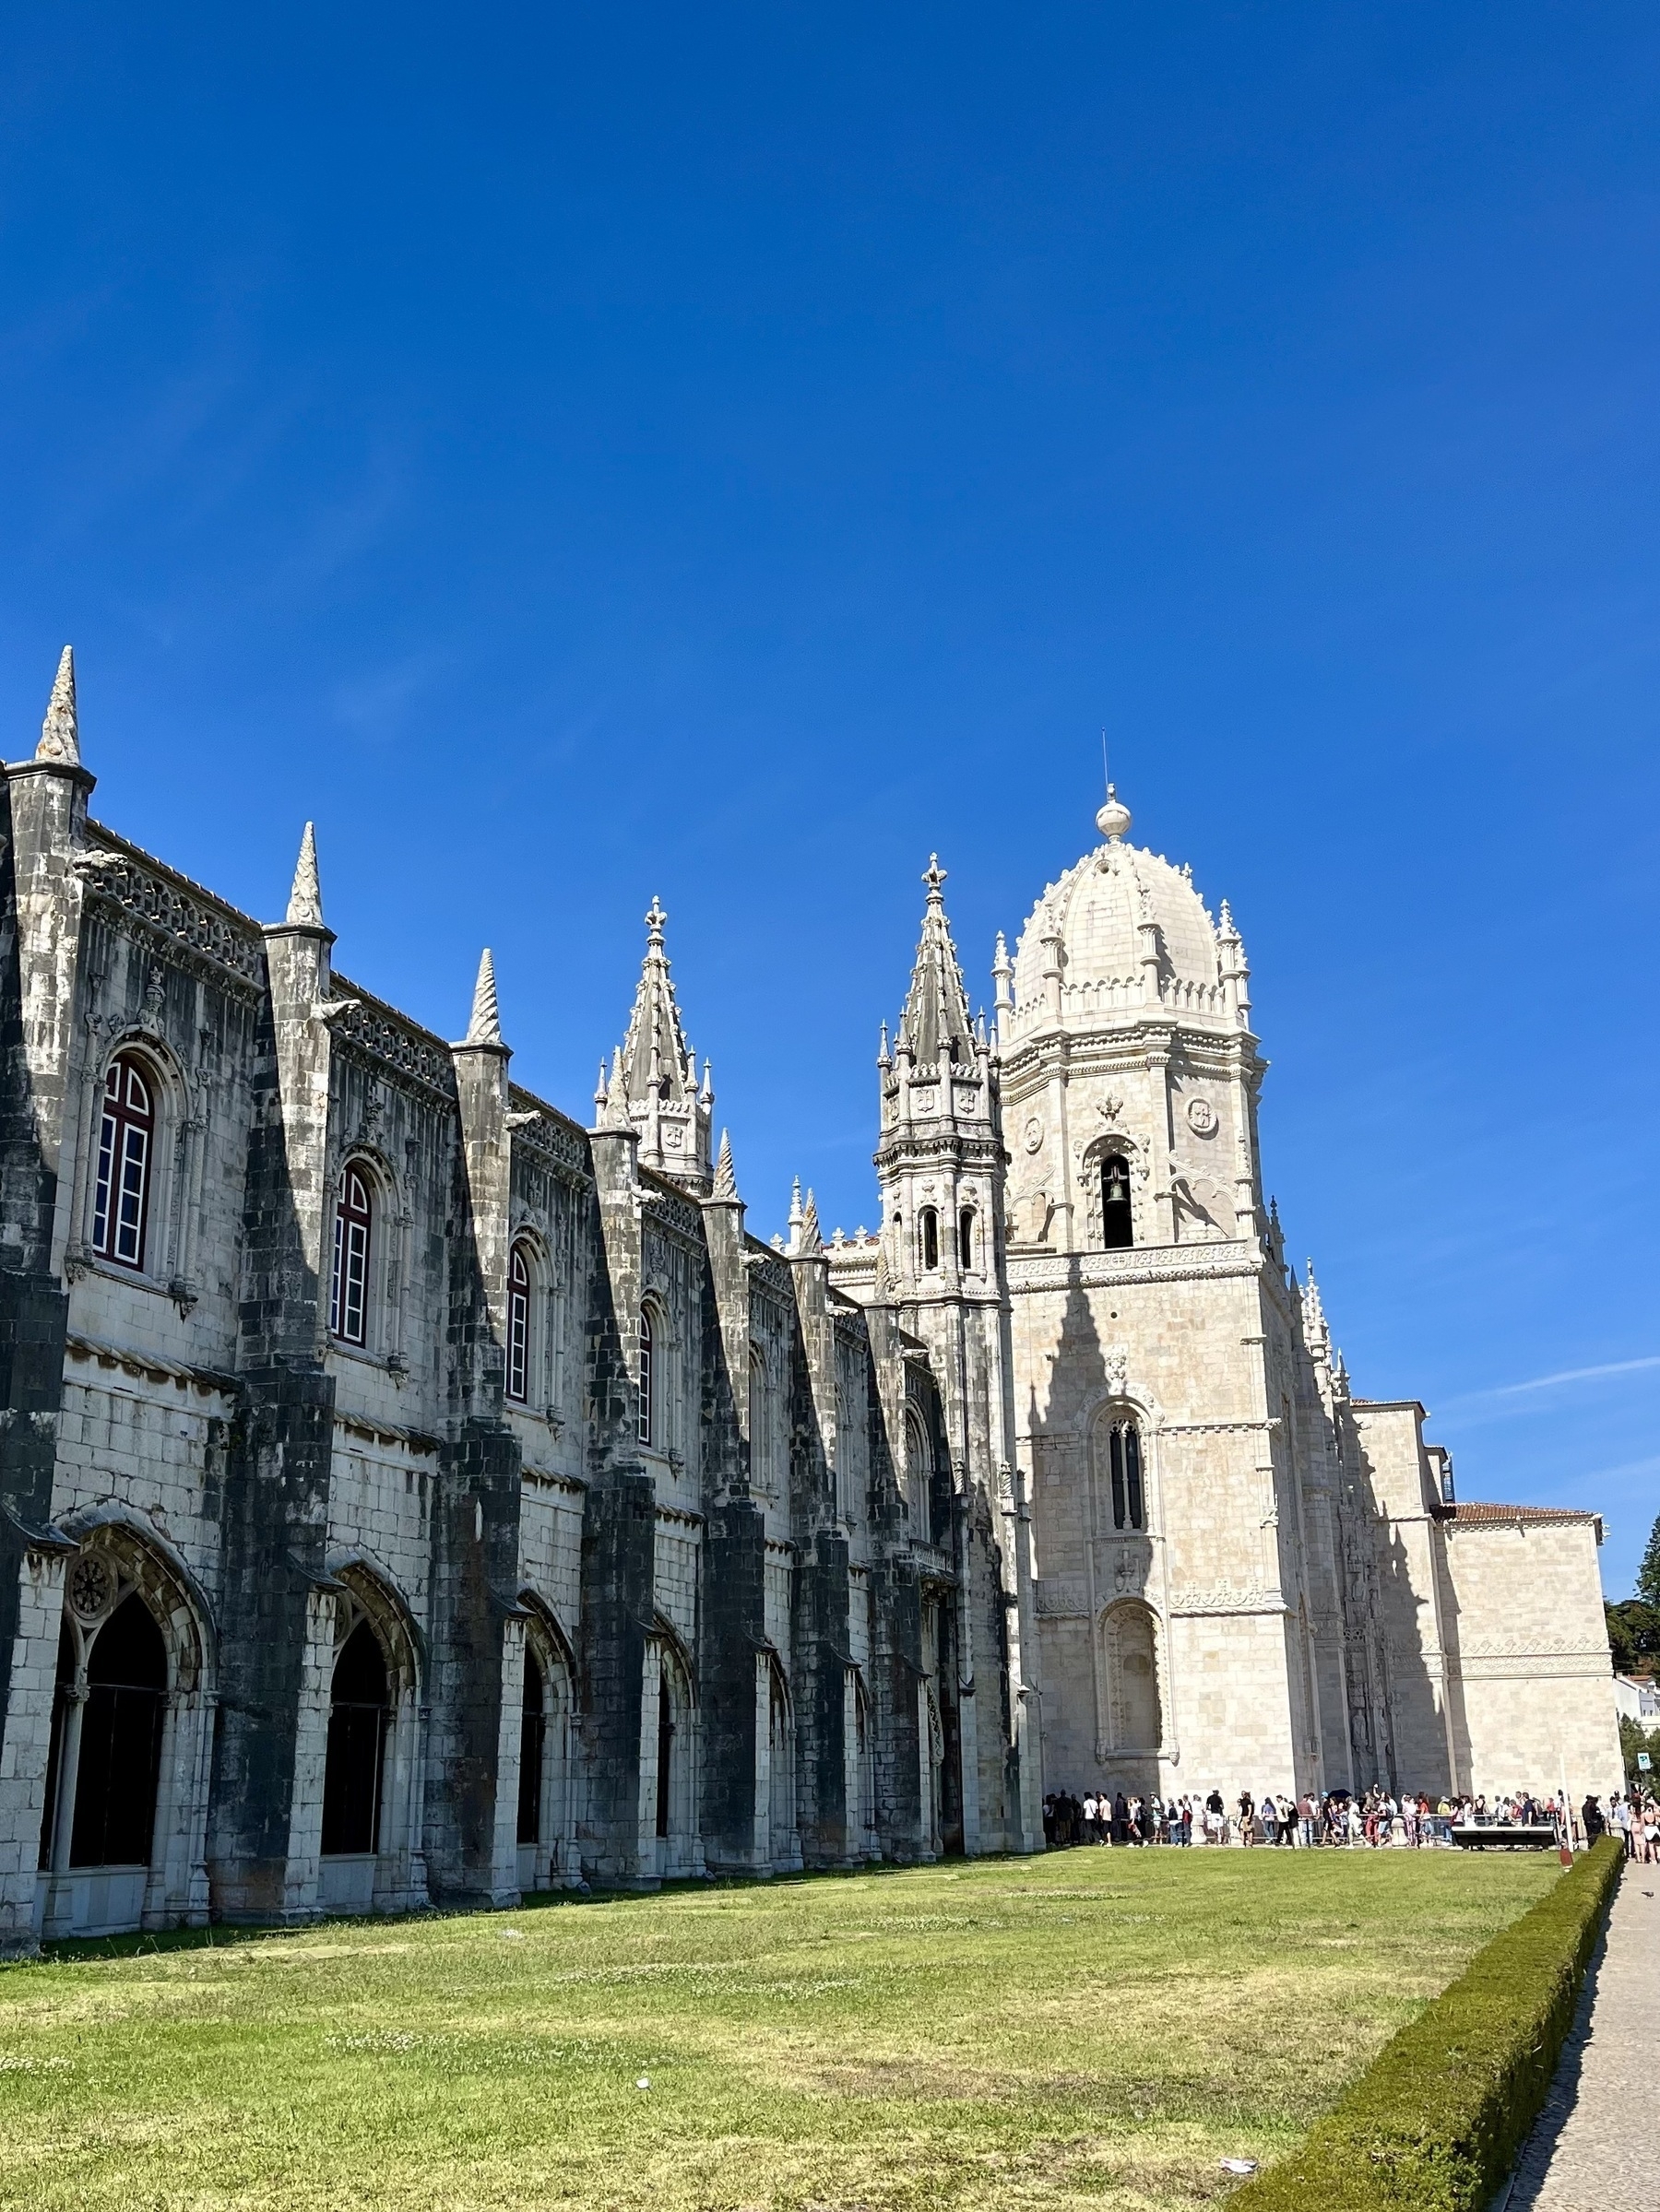 A Gothic monastery stands under a clear blue sky, with visitors queuing outside, set against a backdrop of well-kept green lawns.